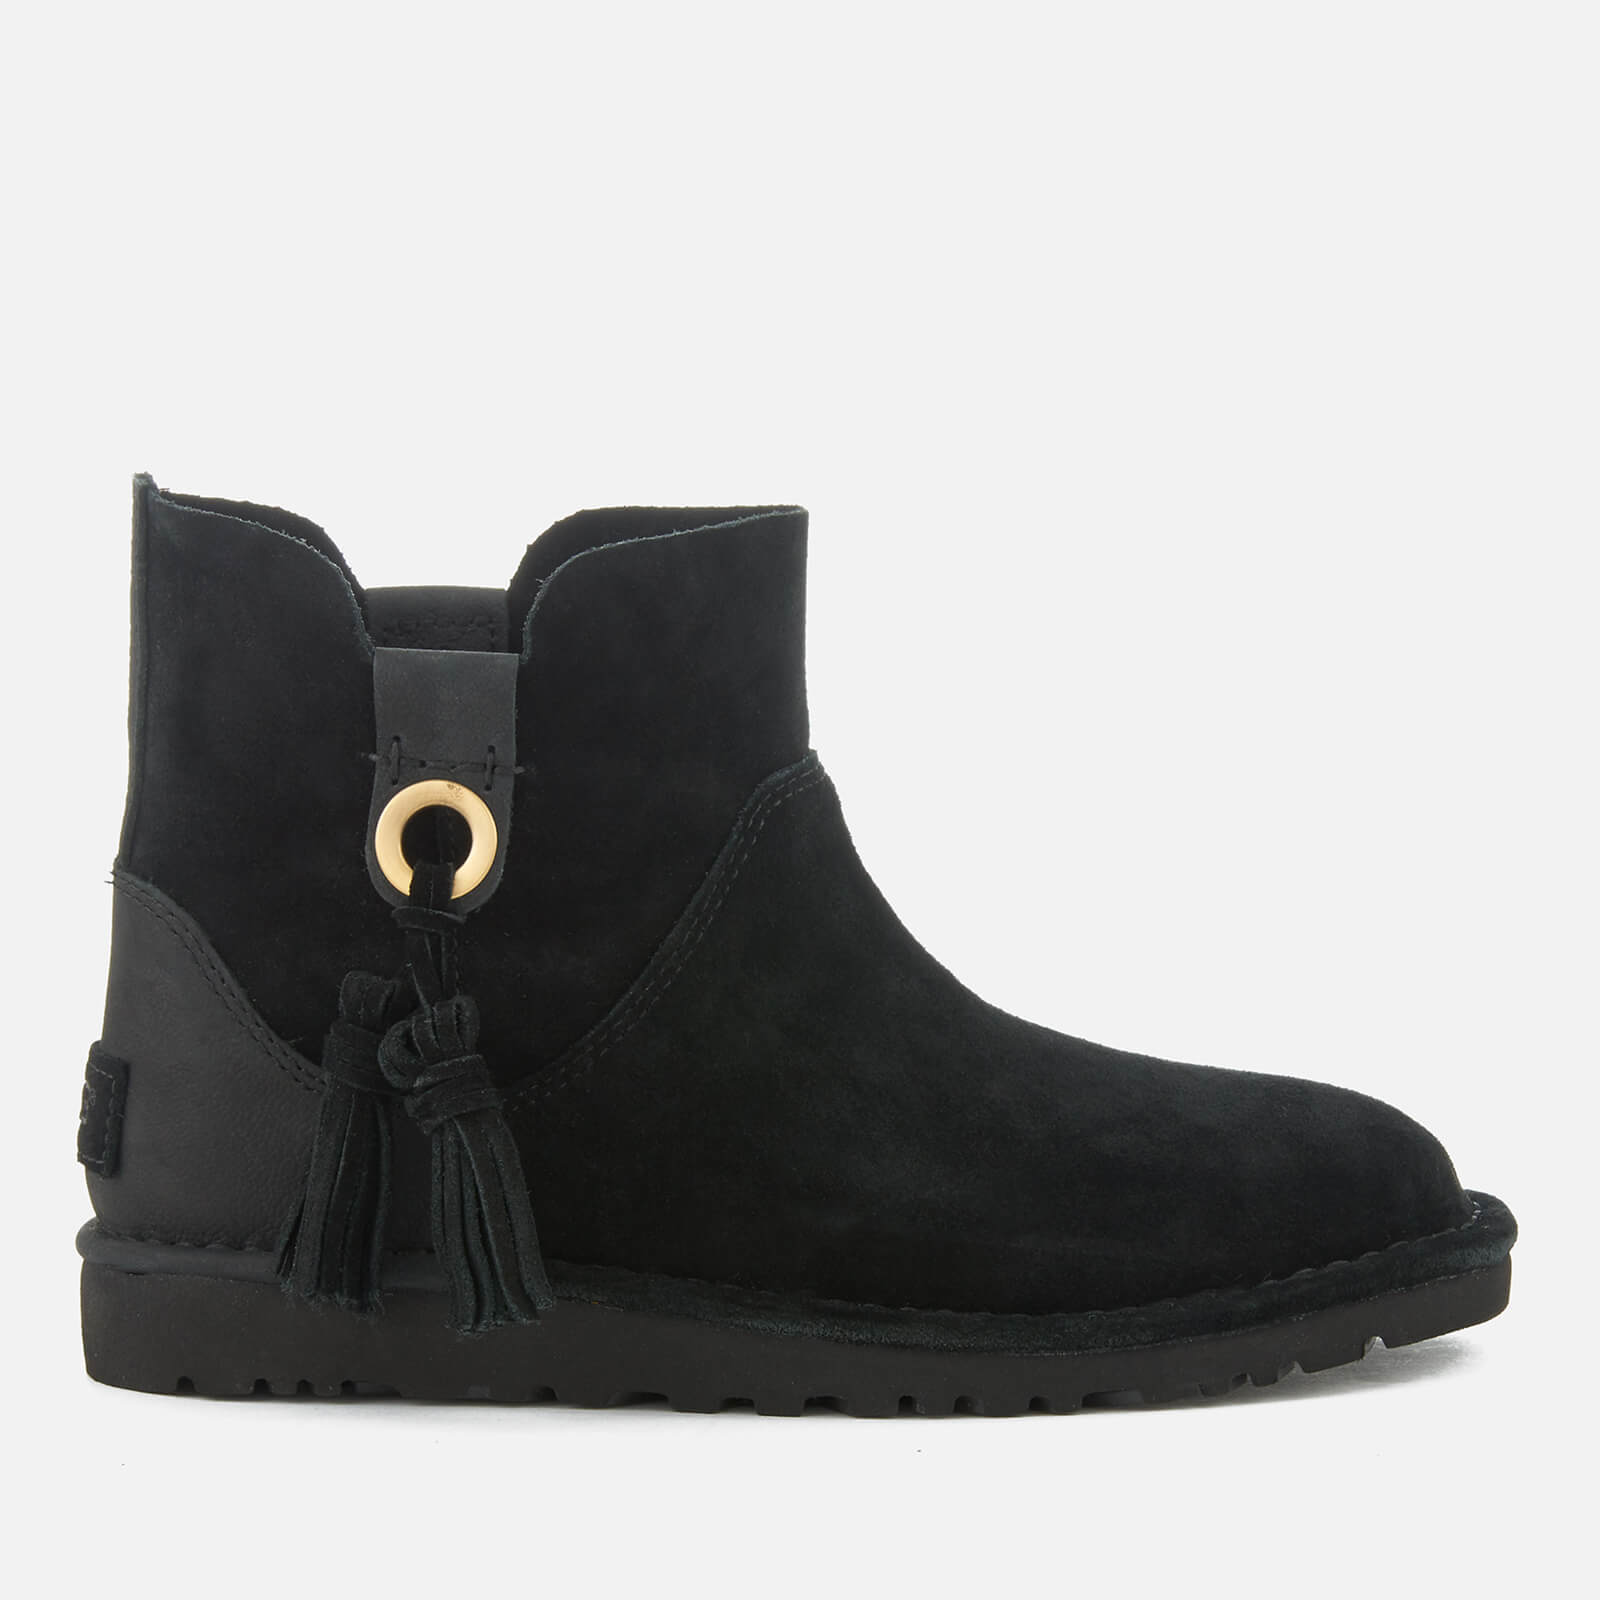 ugg gib ankle boots